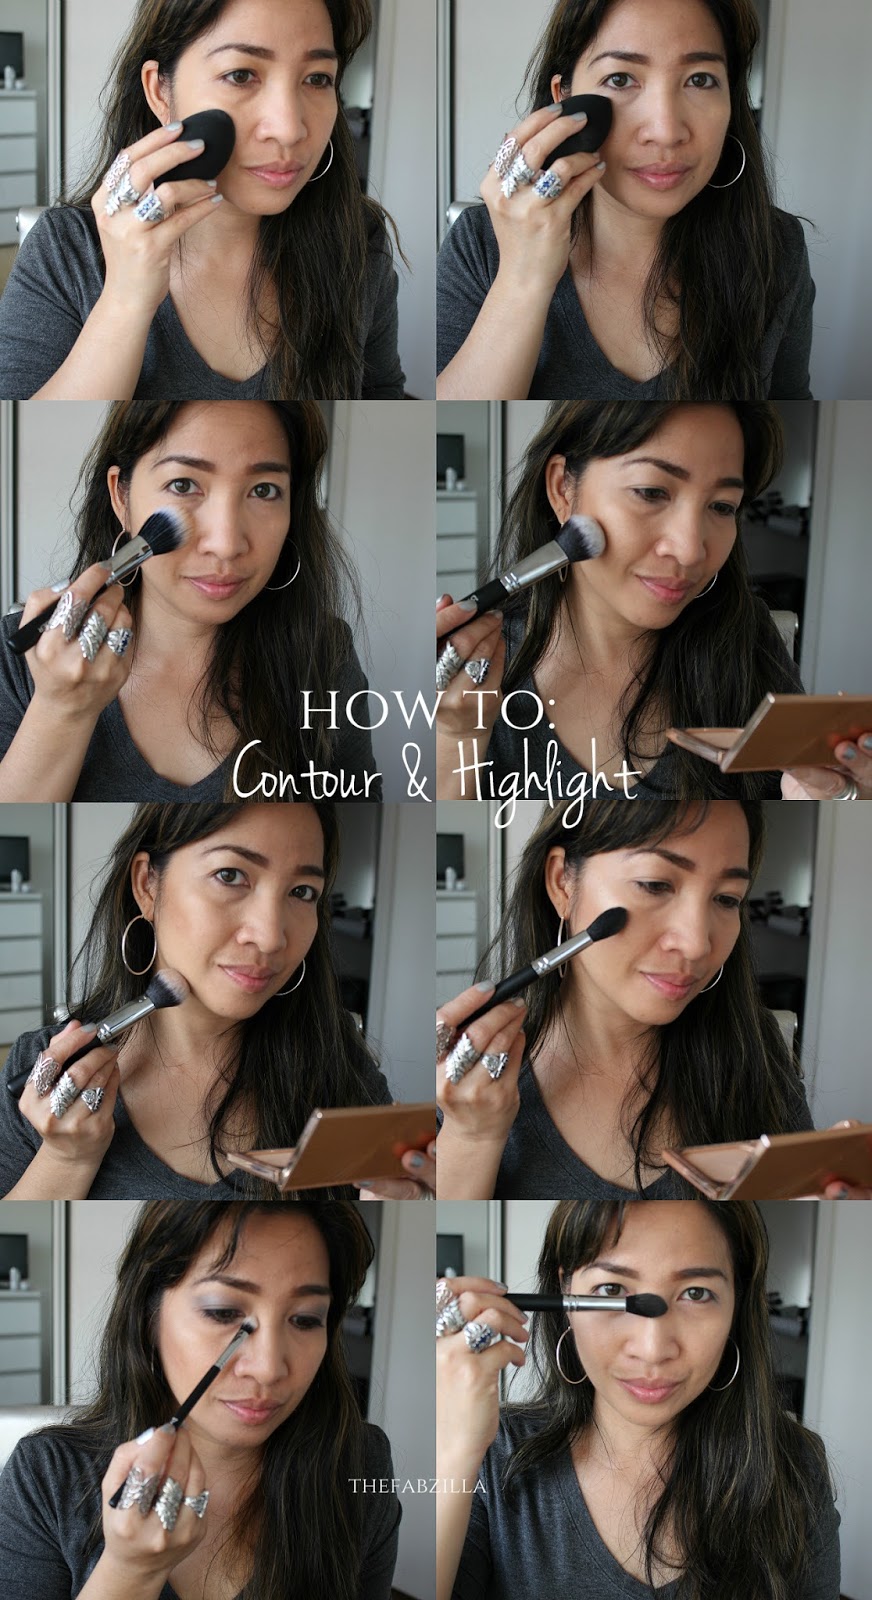 how to contour and highlight tips, highlighting and contouring tutorial